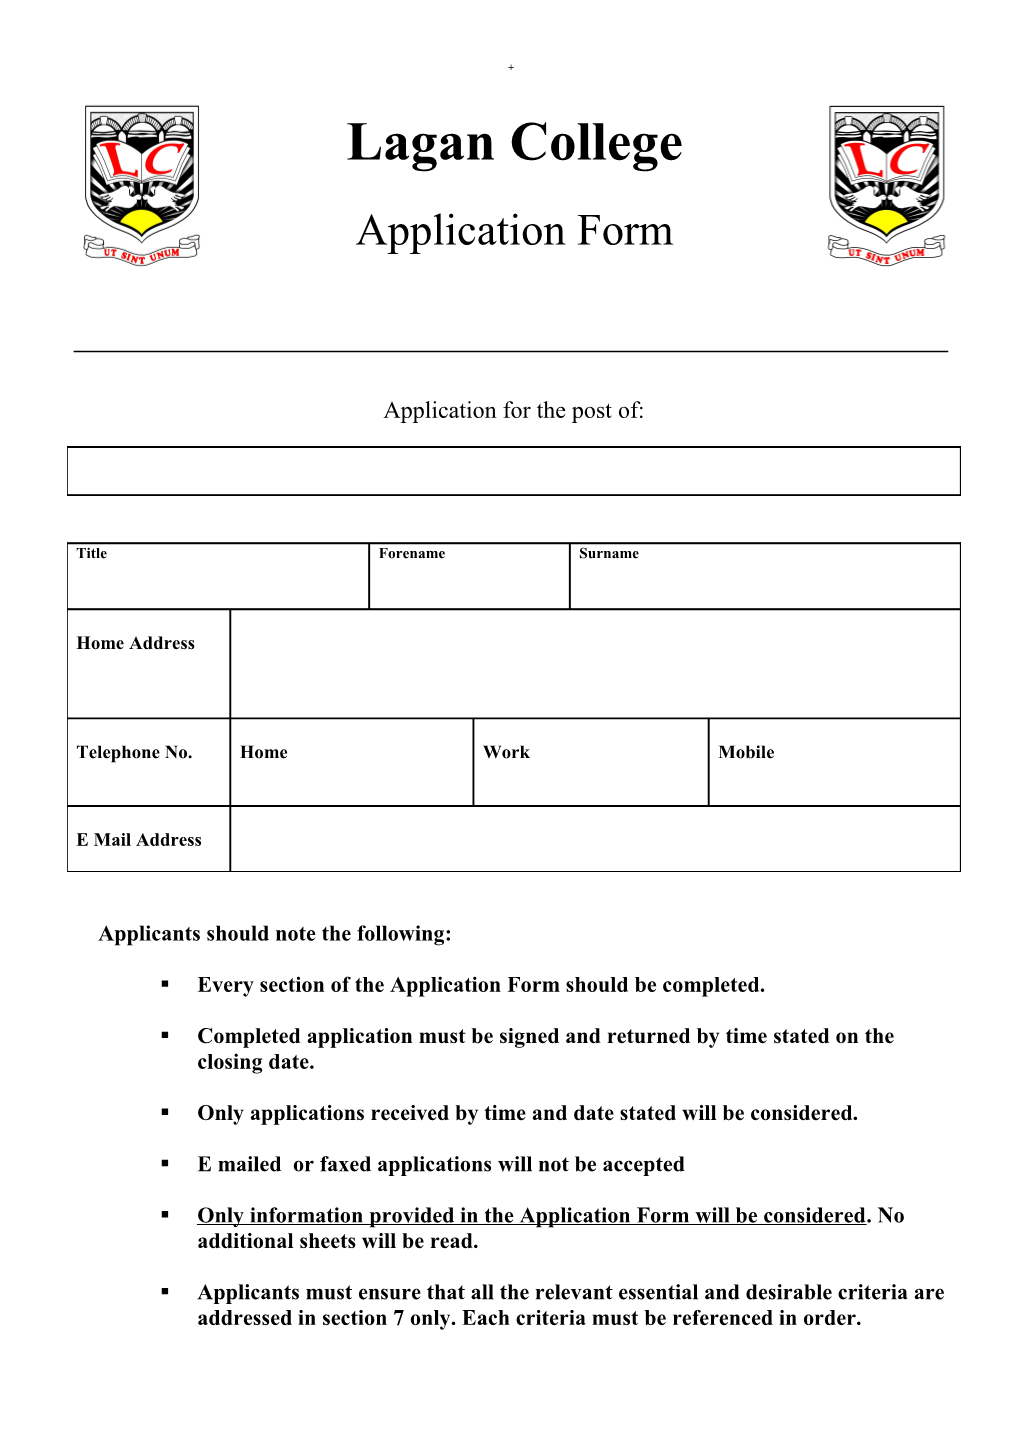 Applicants Should Note the Following